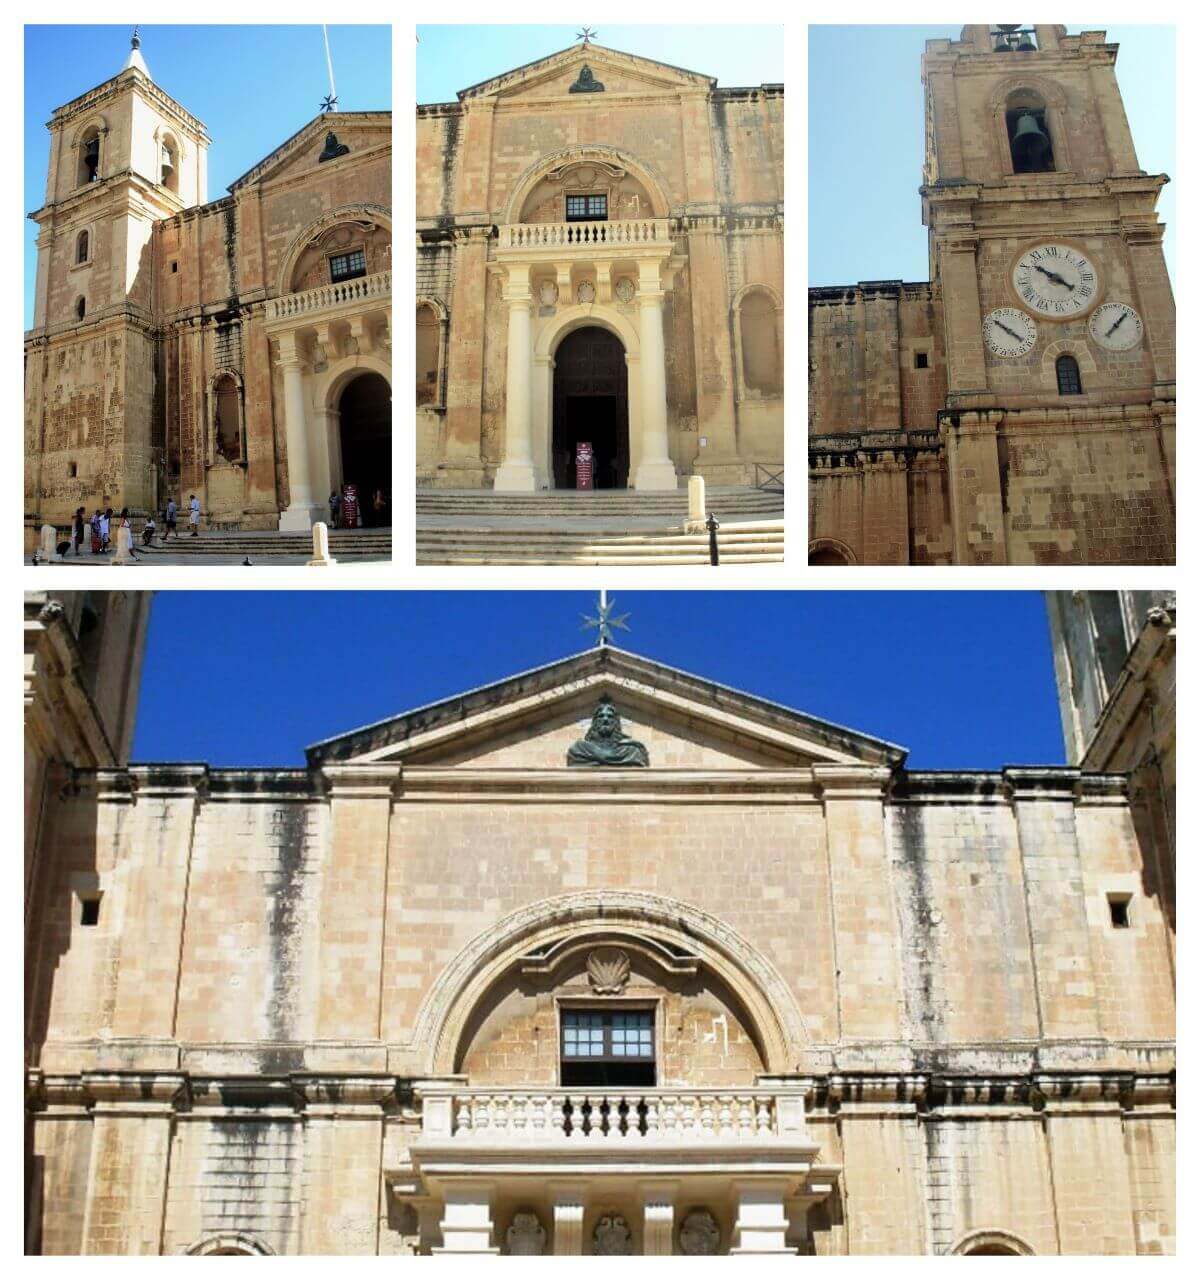 St John’s Co-Cathedral in Valletta